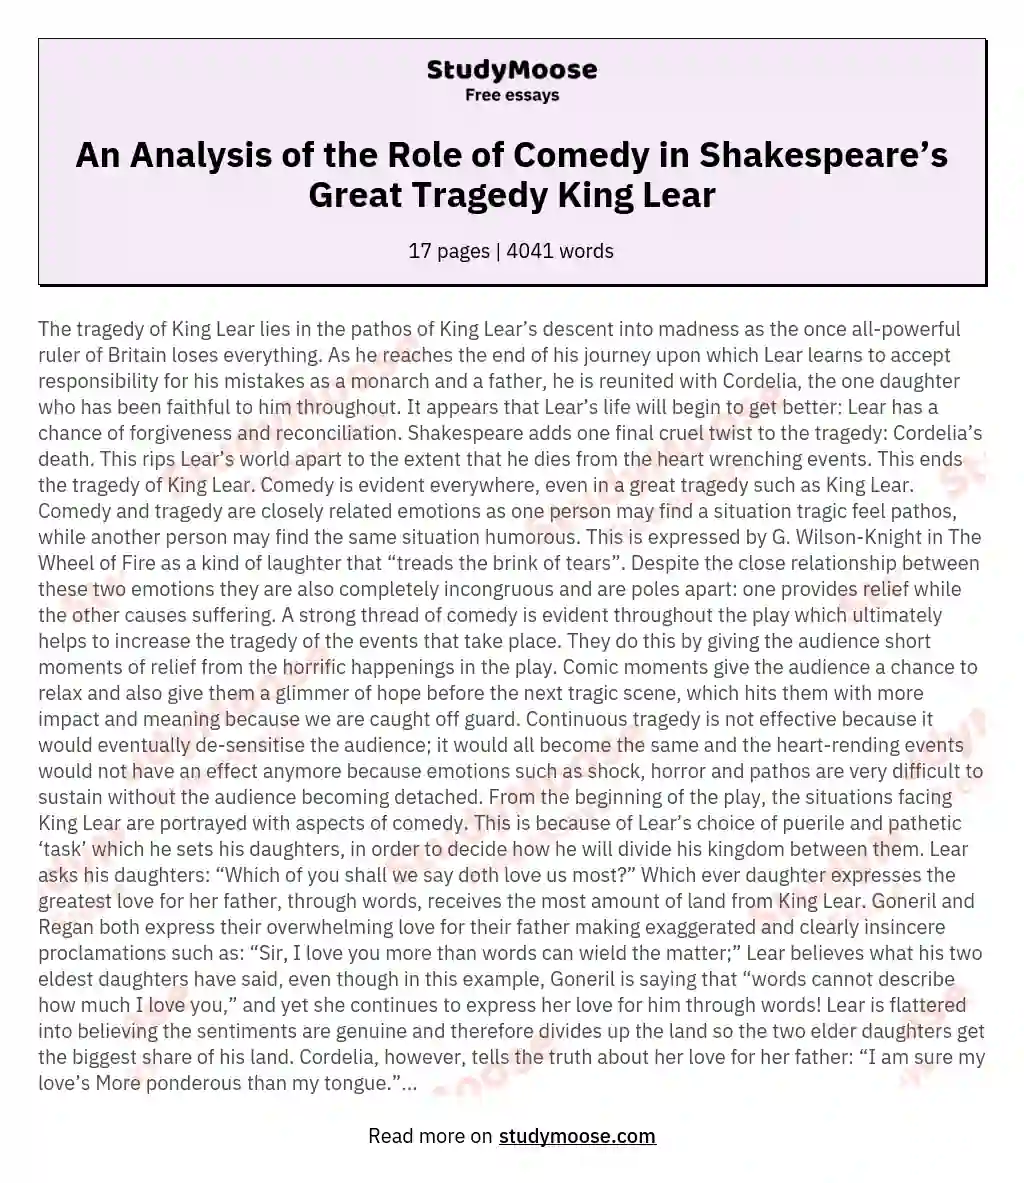 An Analysis of the Role of Comedy in Shakespeare’s Great Tragedy King Lear